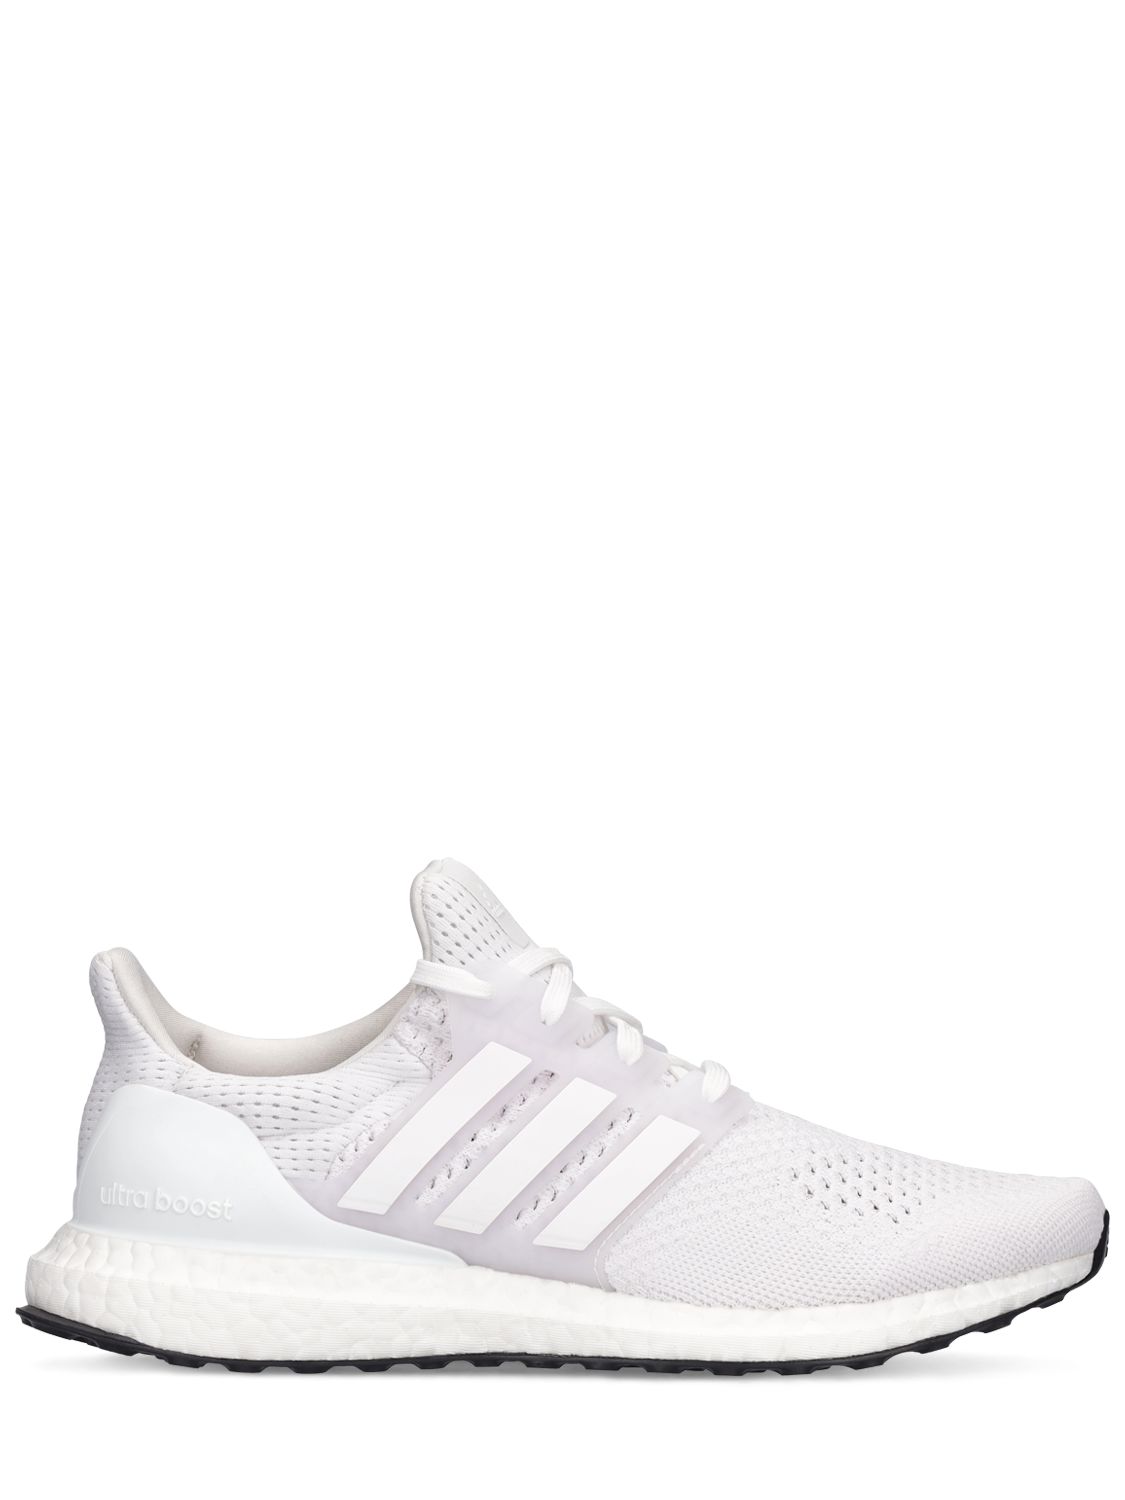 Adidas Originals Ultraboost 1.0 Trainers In White